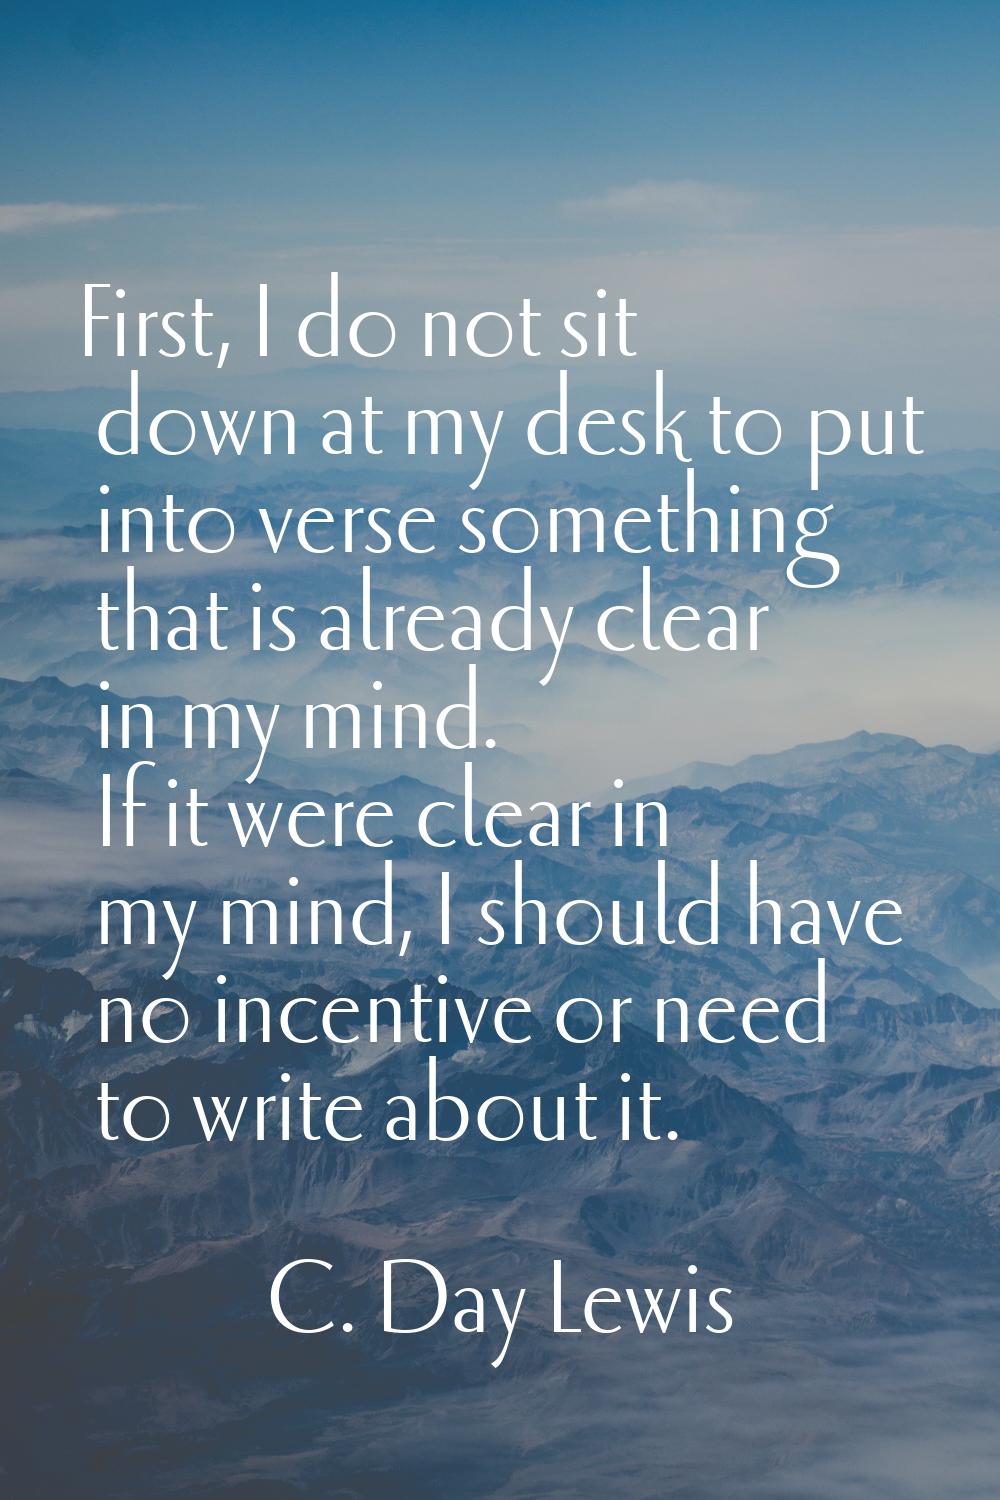 First, I do not sit down at my desk to put into verse something that is already clear in my mind. I